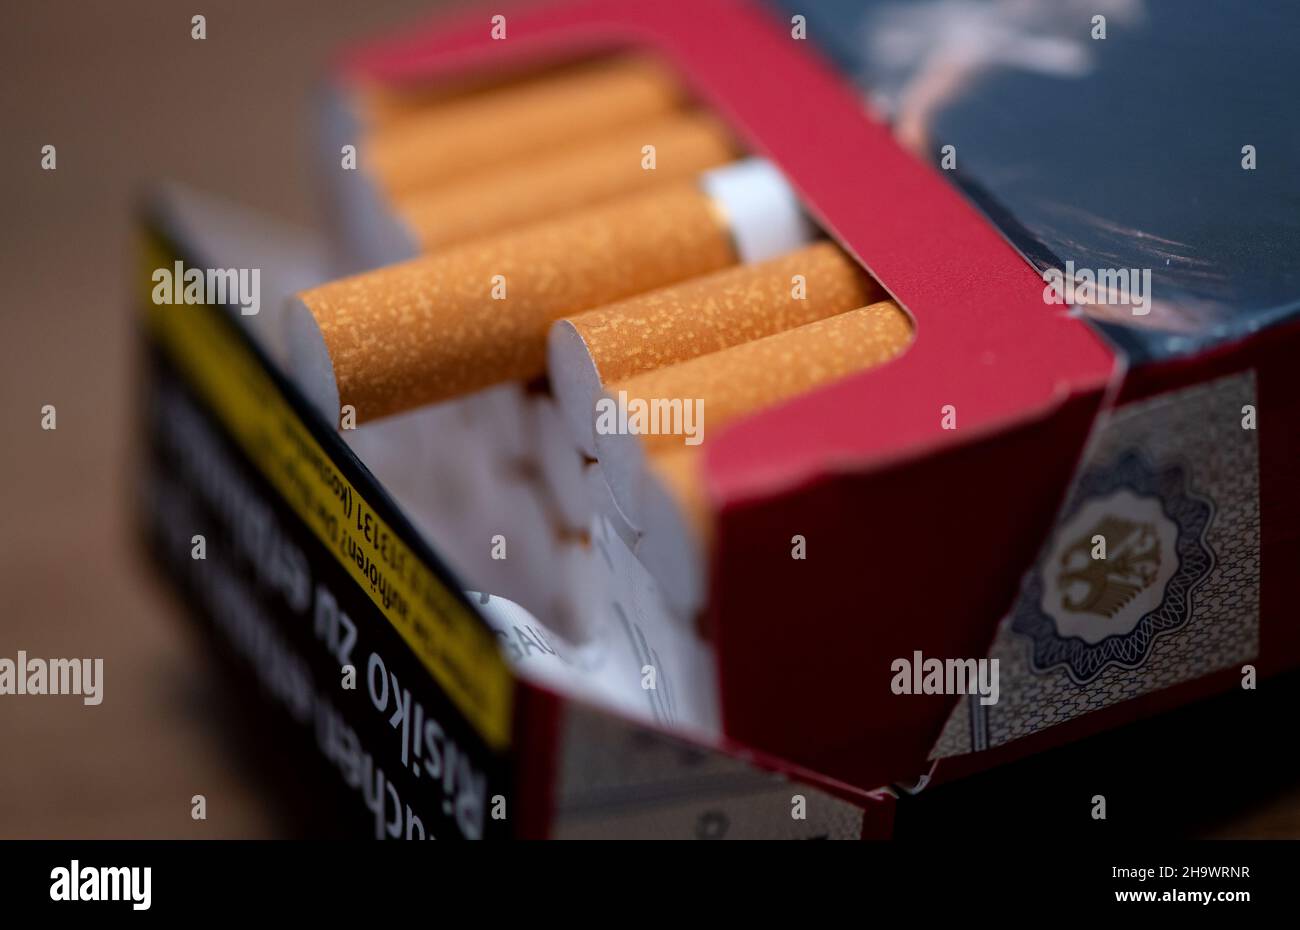 Munich, Germany. 08th Dec, 2021. Cigarettes lying on a table. The German consumer association Pro Rauchfrei sues the operator of two Munich supermarkets for injunctive relief. At the checkouts, cigarettes are offered via vending machines without health-related warnings being visible to the customer from the outside. Credit: Sven Hoppe/dpa/Alamy Live News Stock Photo